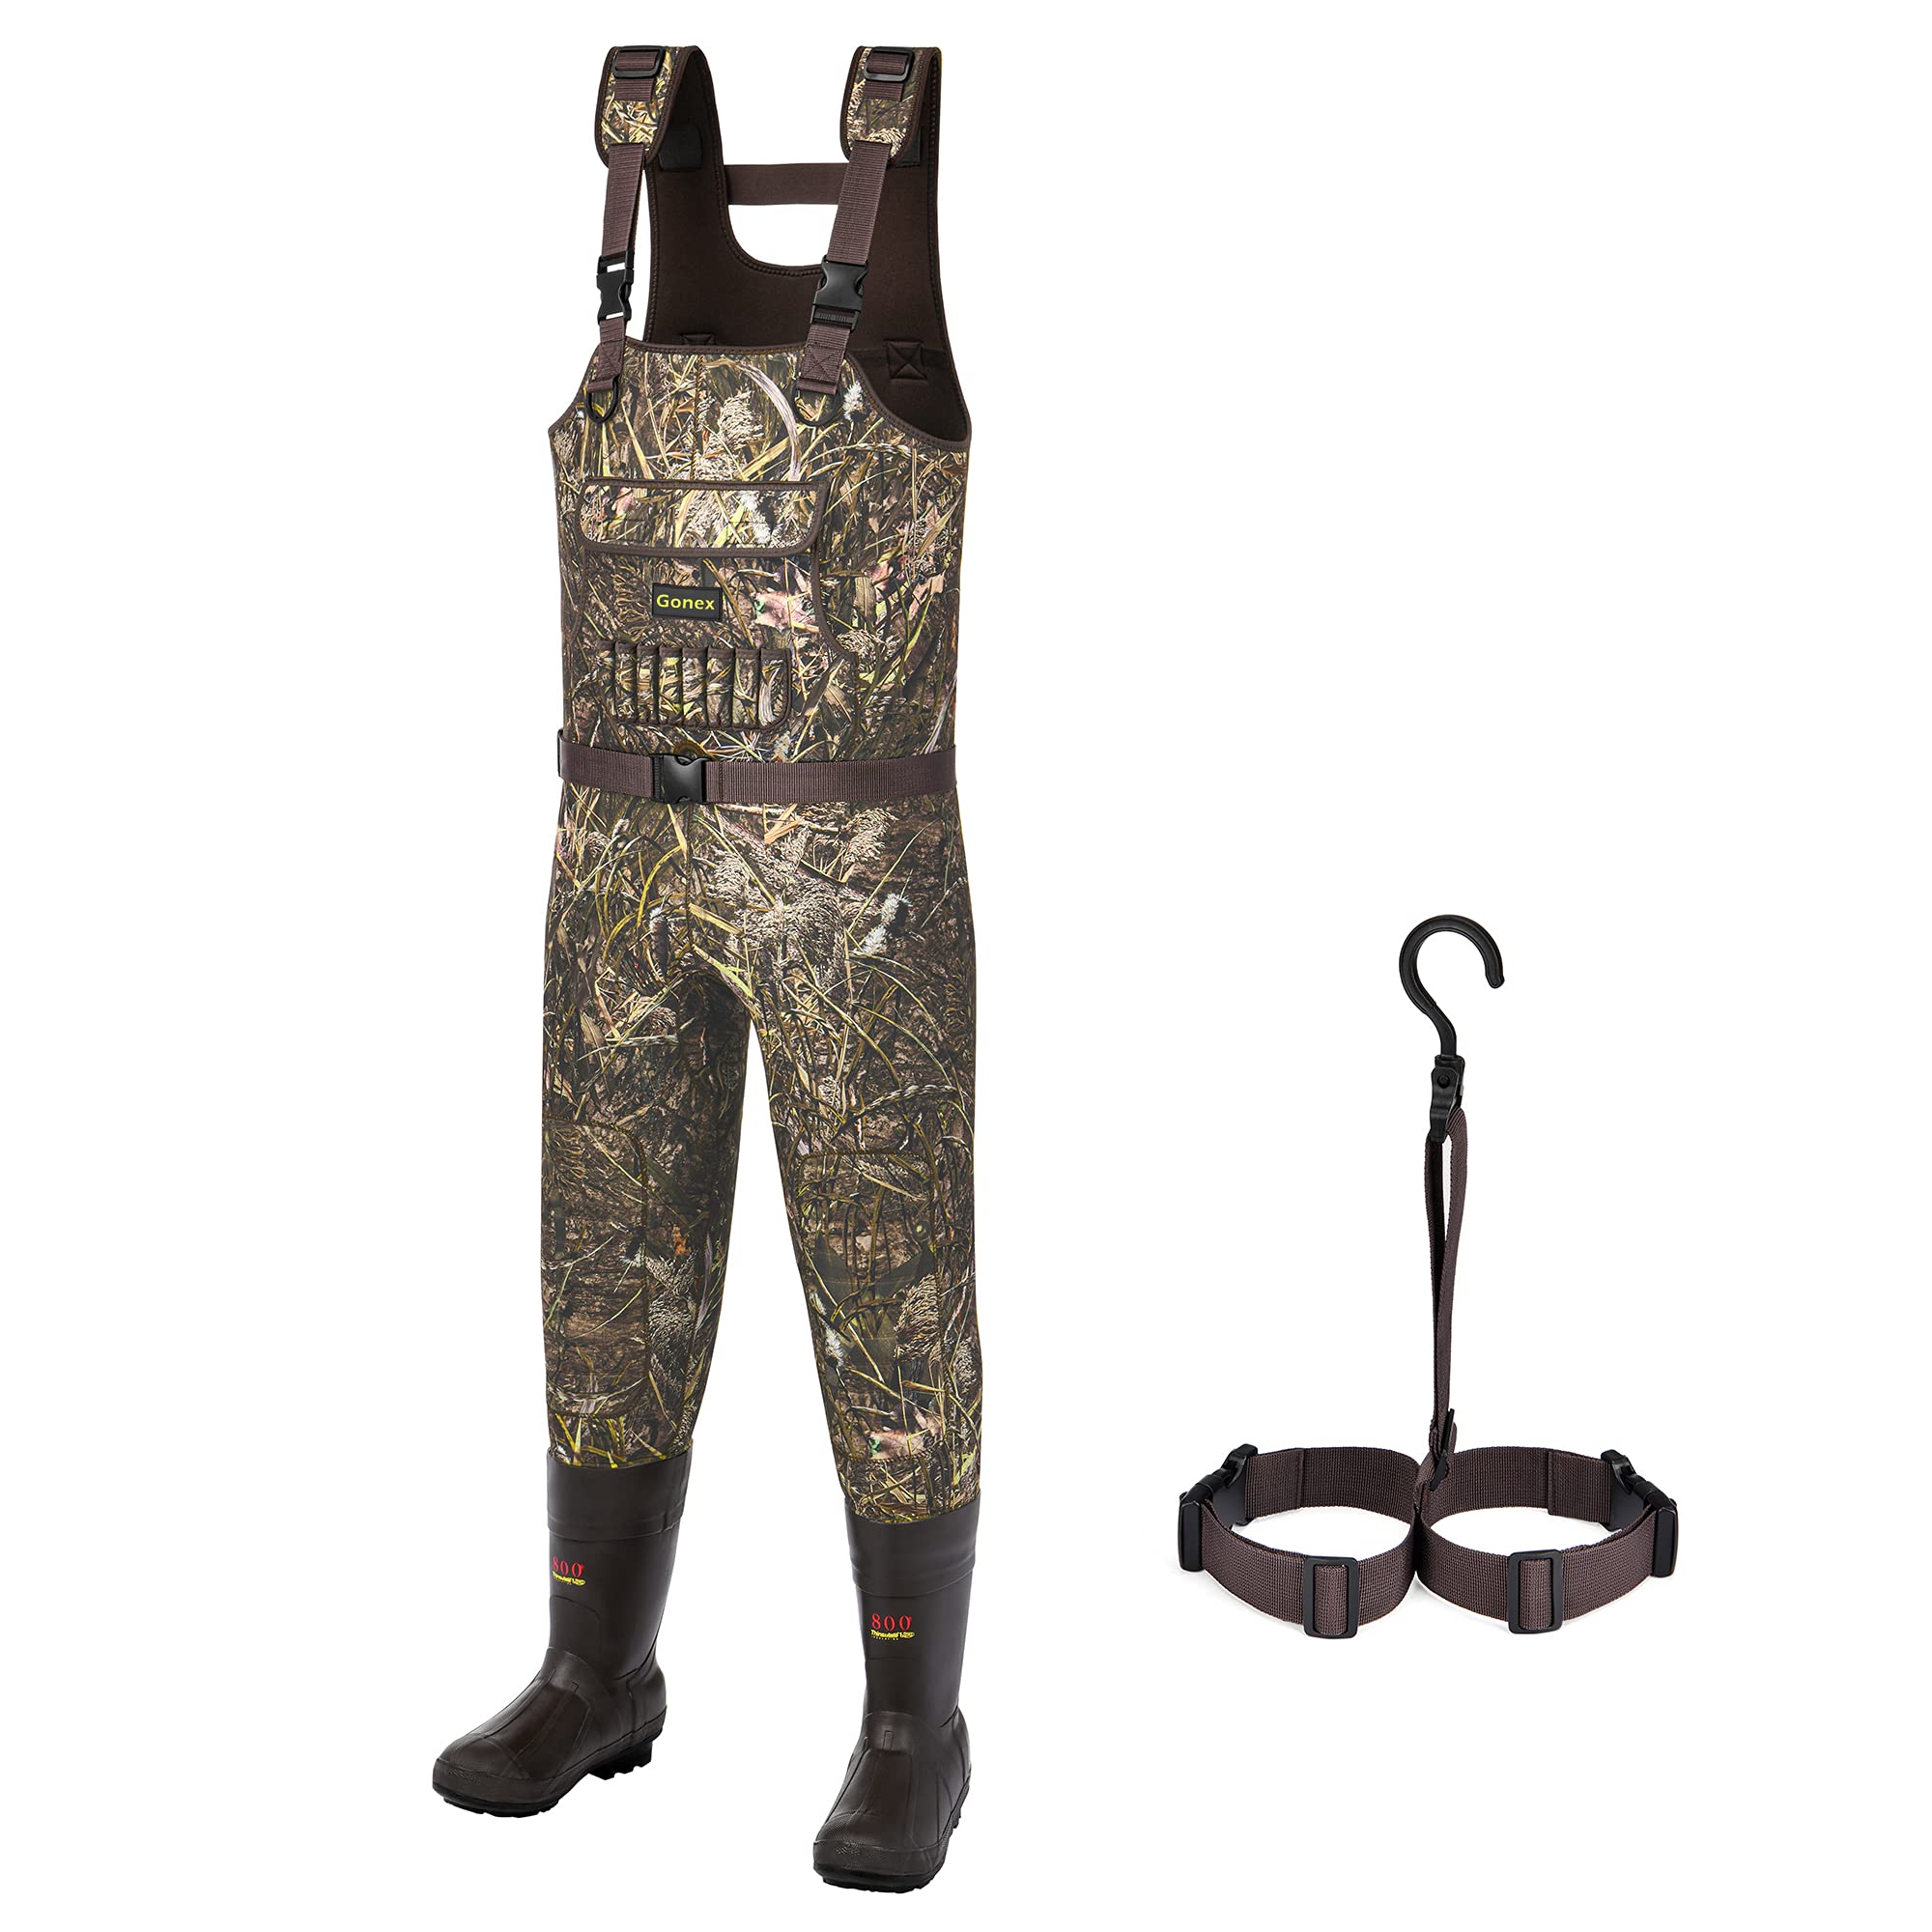 Adult 600g Insulated Rubber Boot 4.5mm Neoprene Camo Chest Waders